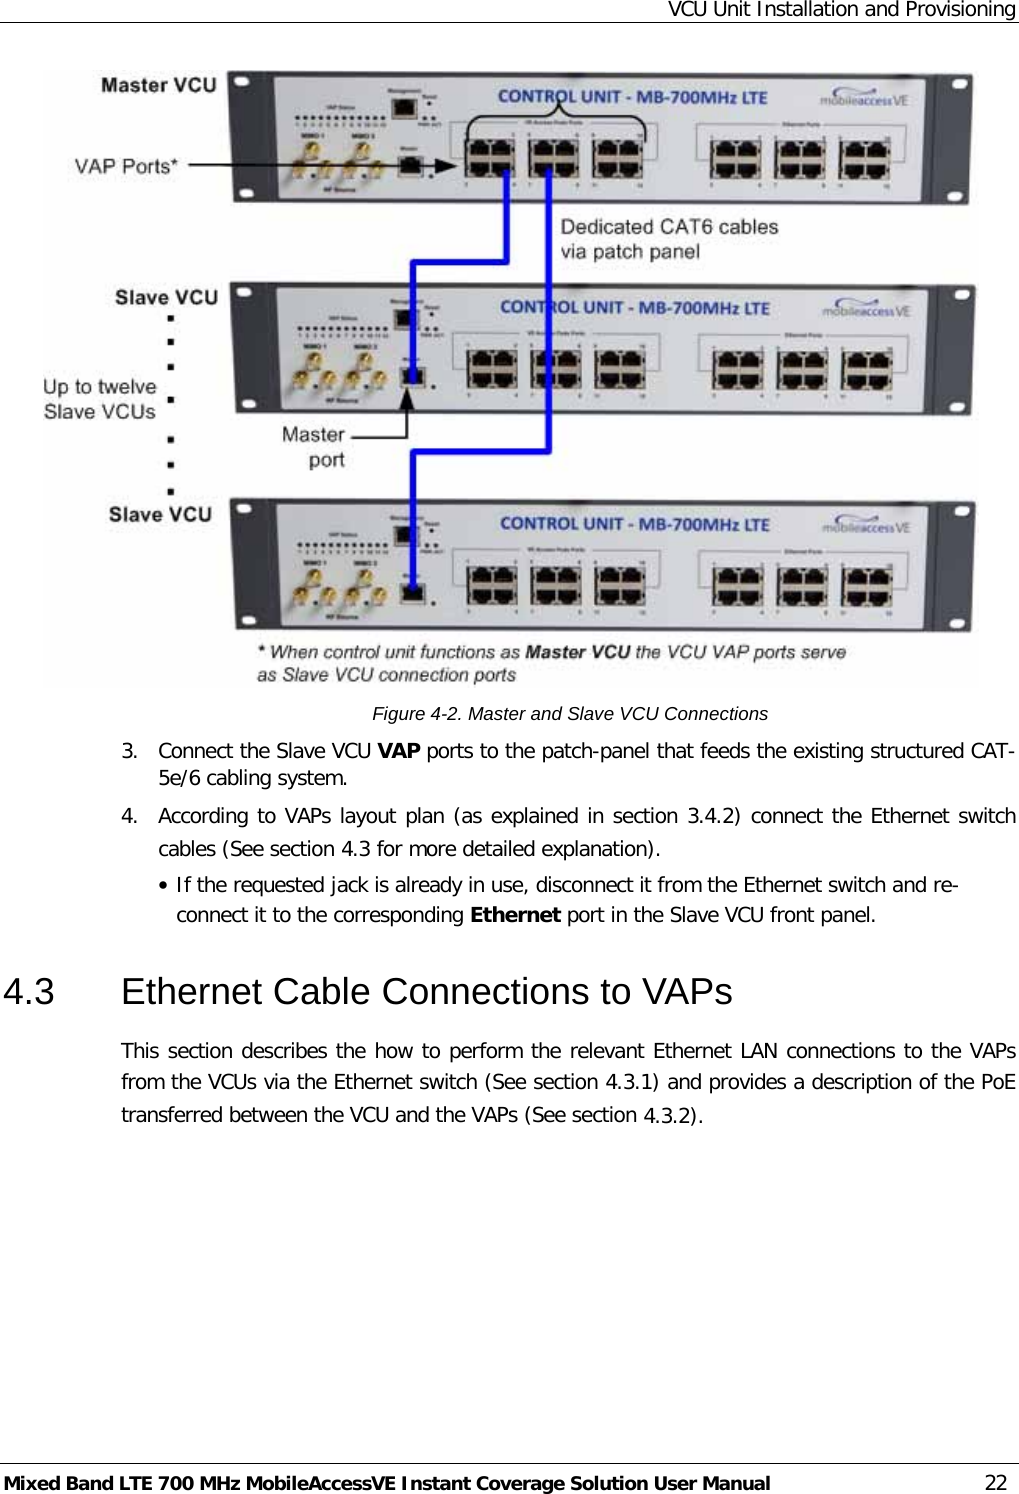 VCU Unit Installation and Provisioning Mixed Band LTE 700 MHz MobileAccessVE Instant Coverage Solution User Manual  22  Figure  4-2. Master and Slave VCU Connections 3.  Connect the Slave VCU VAP ports to the patch-panel that feeds the existing structured CAT-5e/6 cabling system. 4.  According to VAPs layout plan (as explained in section  3.4.2) connect the Ethernet switch cables (See section  4.3 for more detailed explanation). • If the requested jack is already in use, disconnect it from the Ethernet switch and re-connect it to the corresponding Ethernet port in the Slave VCU front panel. 4.3  Ethernet Cable Connections to VAPs This section describes the how to perform the relevant Ethernet LAN connections to the VAPs from the VCUs via the Ethernet switch (See section  4.3.1) and provides a description of the PoE transferred between the VCU and the VAPs (See section  4.3.2).    